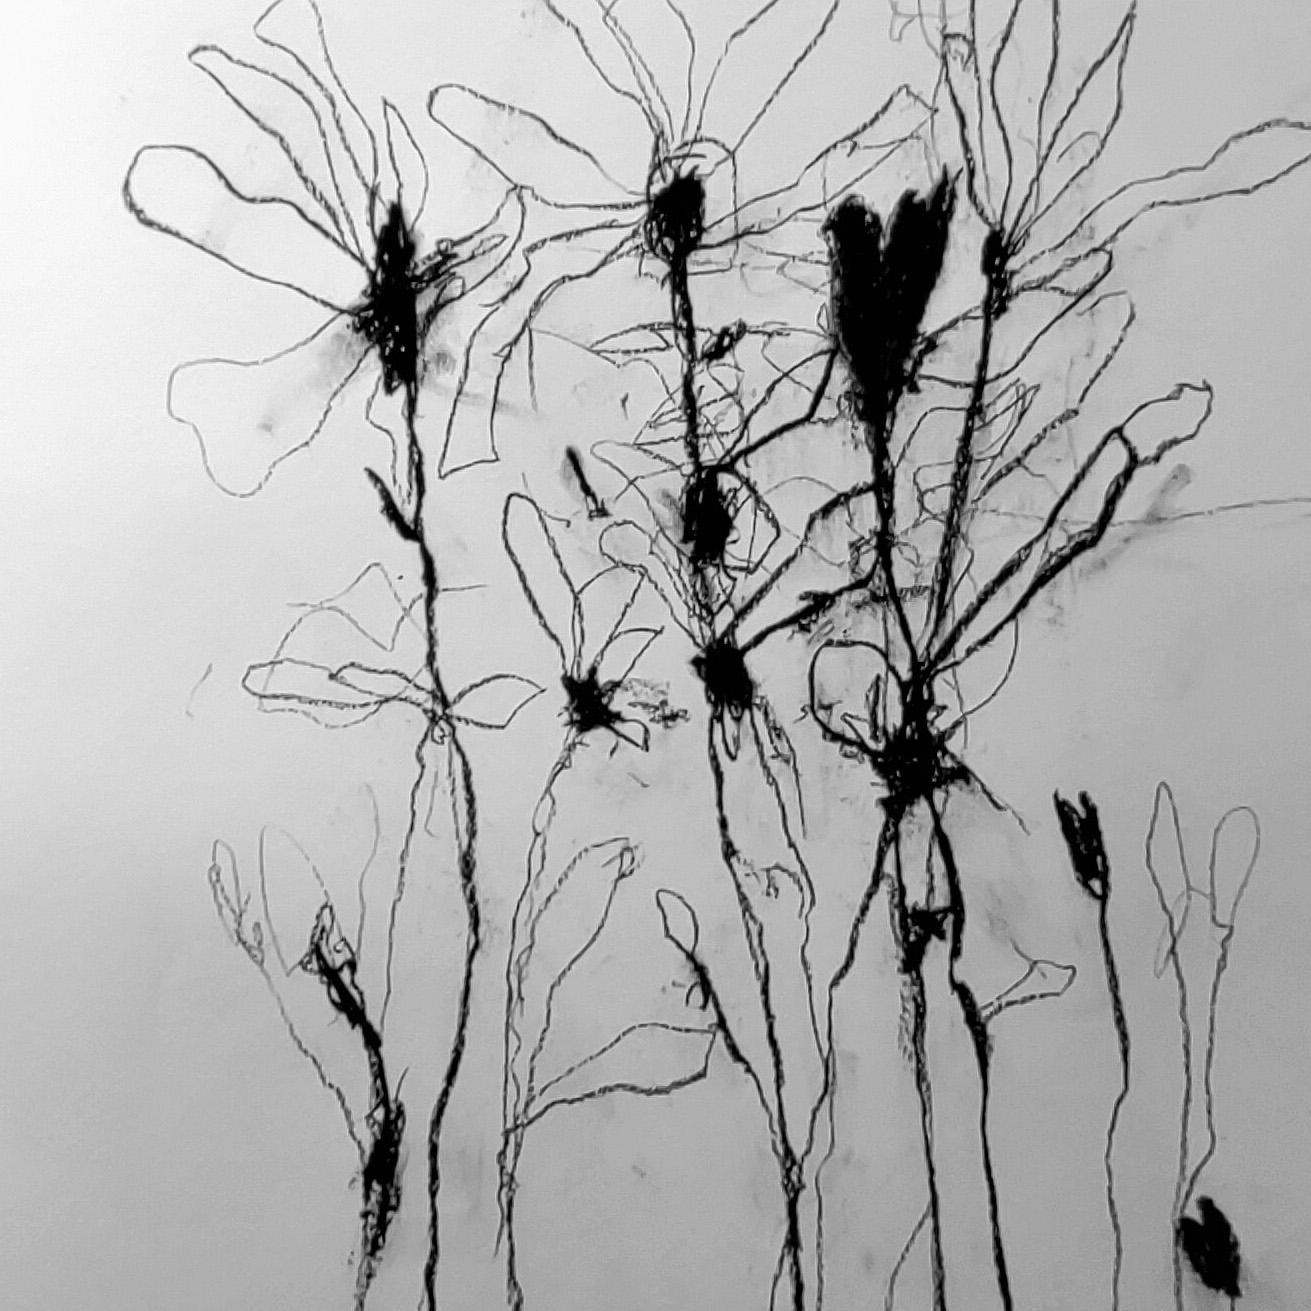 In the weeds ink bloom #1 (Abstract painting)

Charcoal & Oilstick on paper - Unframed.

Baribeau constructs his paintings layer upon layer, building color, form and texture into viscous, impasto compositions, on supports that are themselves often